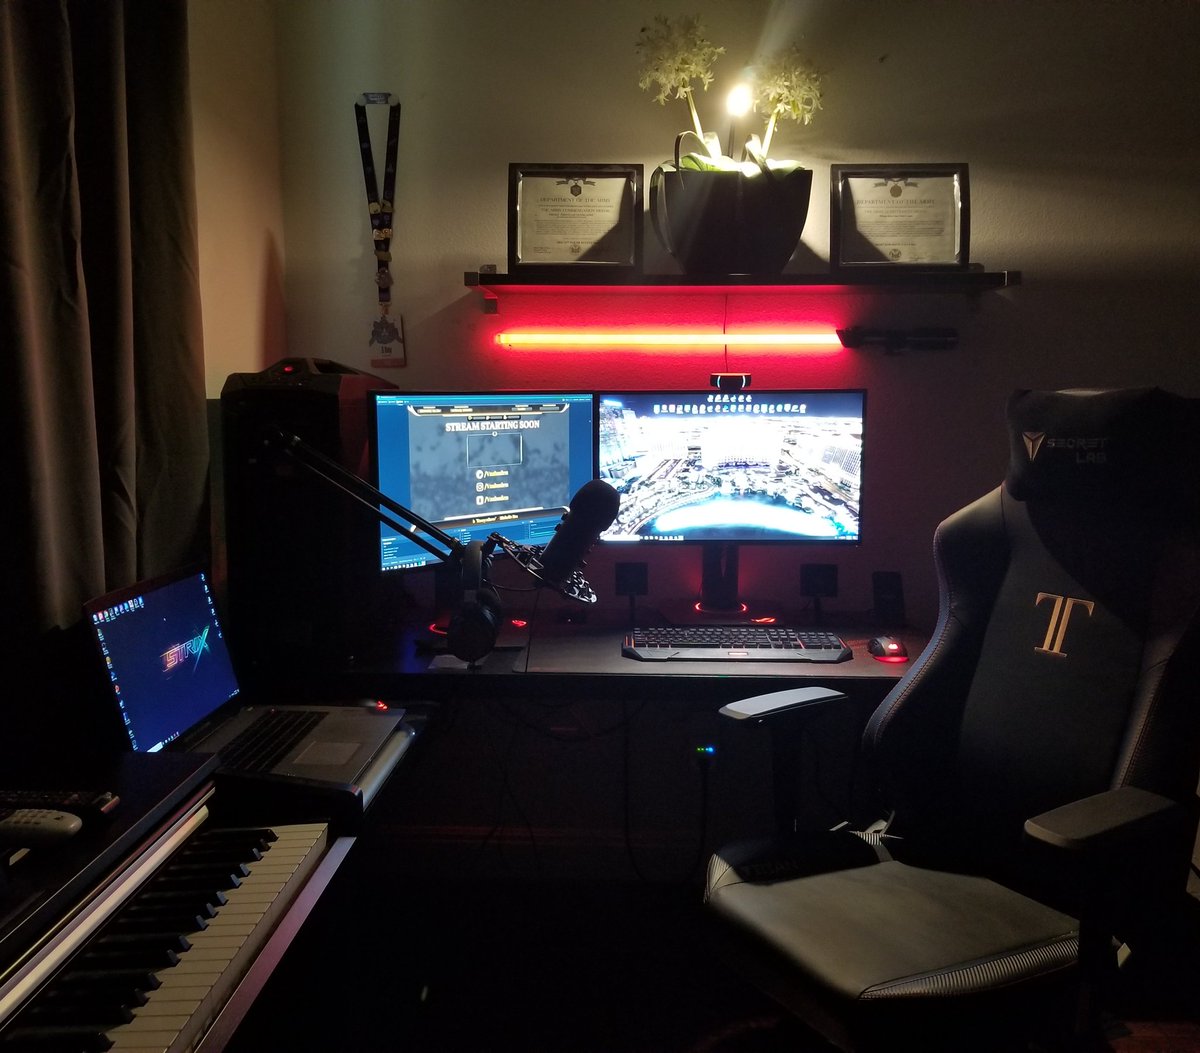 ... there is only #passion - through passion, #strength - through strength, #power - through power #victory ... #VegasStrong
#asus #republicofgamers #blueyeti #darthvader #armycommendationmedal #armyachievementmedal #usarmyveteran #secretlab #titan #piano #gamer #twitch #vashoden